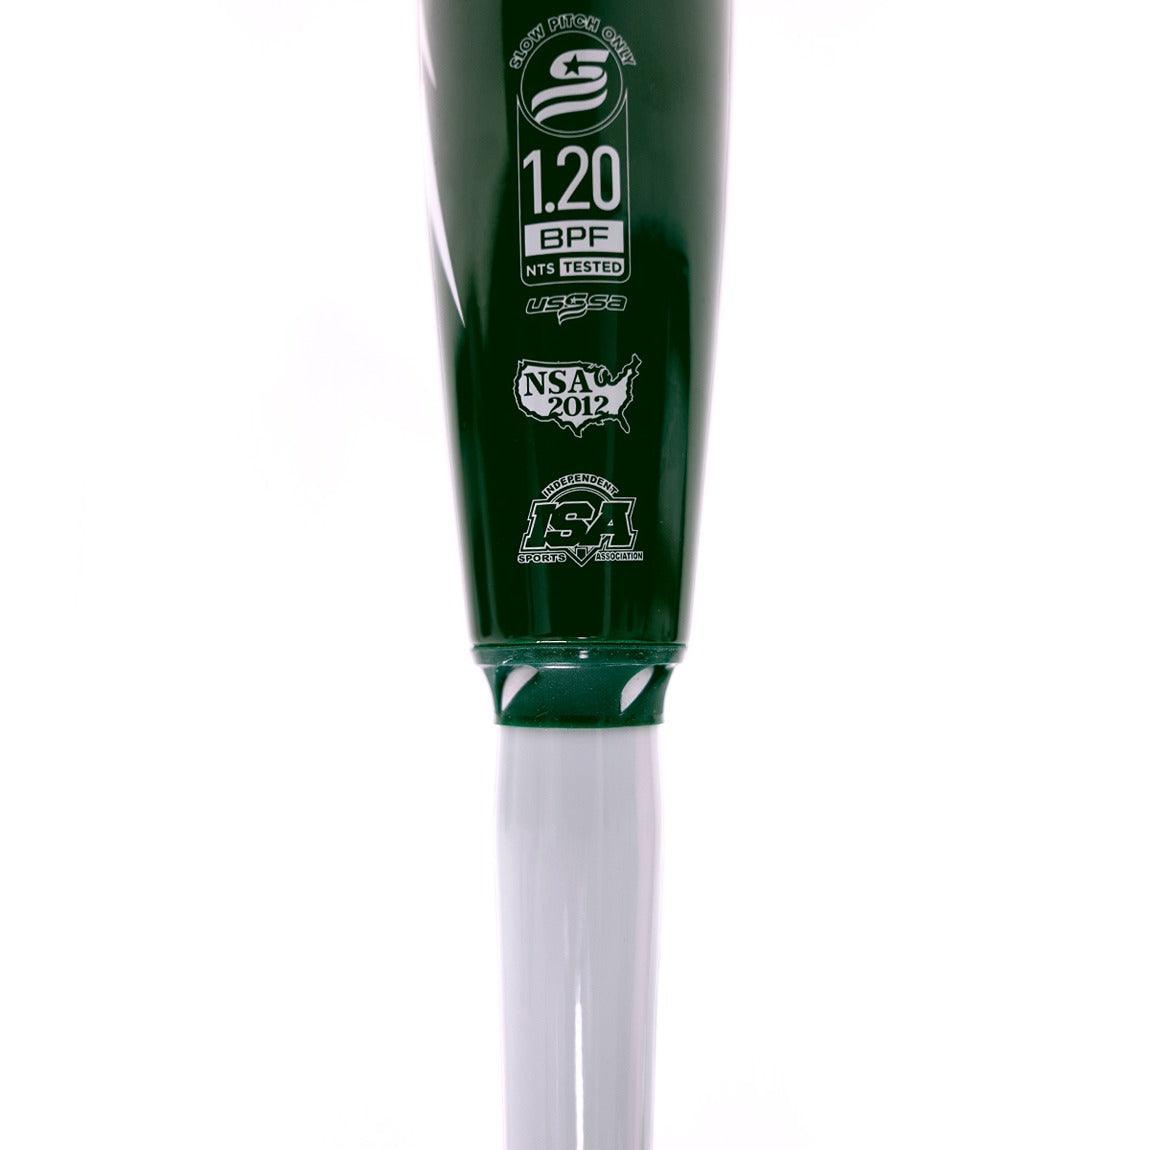 Andy Purcell Endload 3.0 USSSA Slowpitch Bat - Sports Excellence